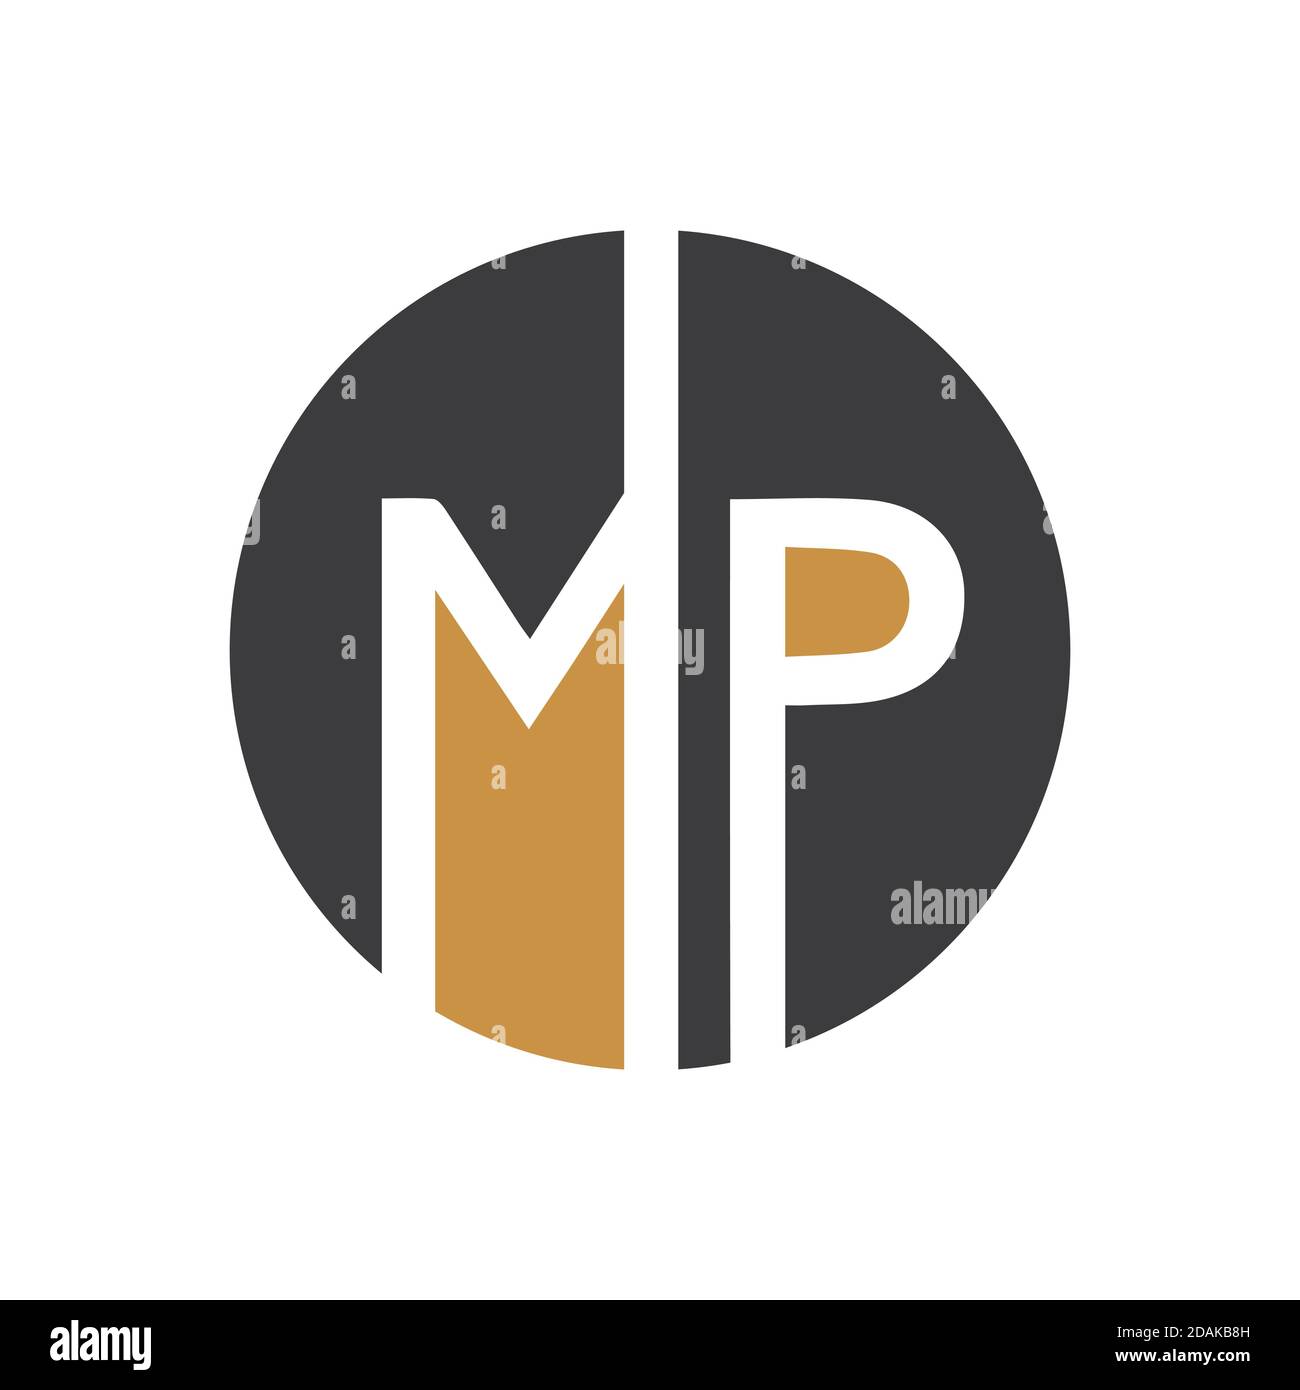 Initial Letter Mp Logo or Pm Logo Vector Design Template Stock